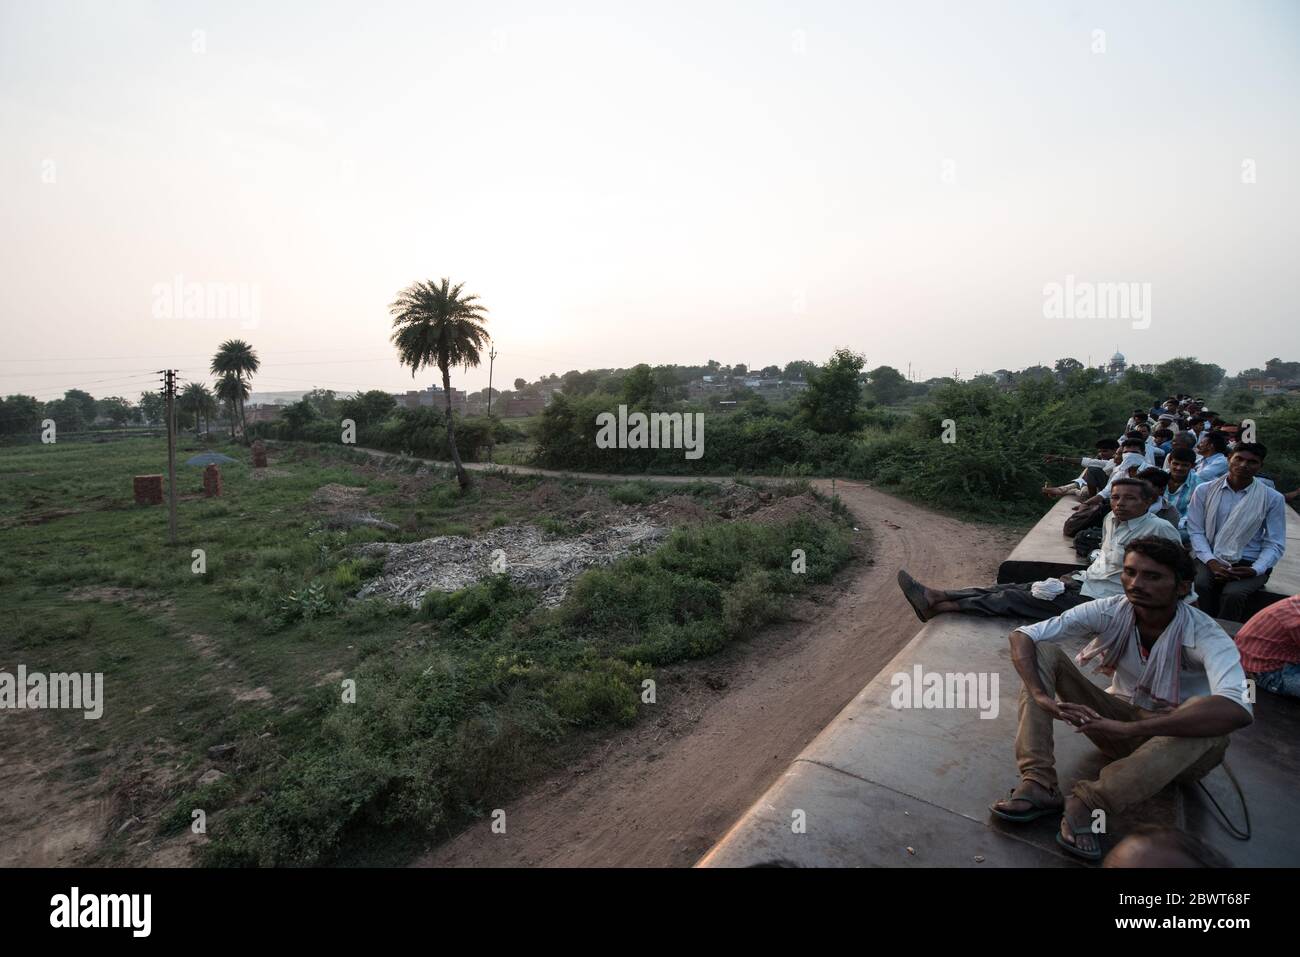 Men on top of overcrowded train passing through countryside in Madhya Pradesh, India. Indian Railways. Stock Photo